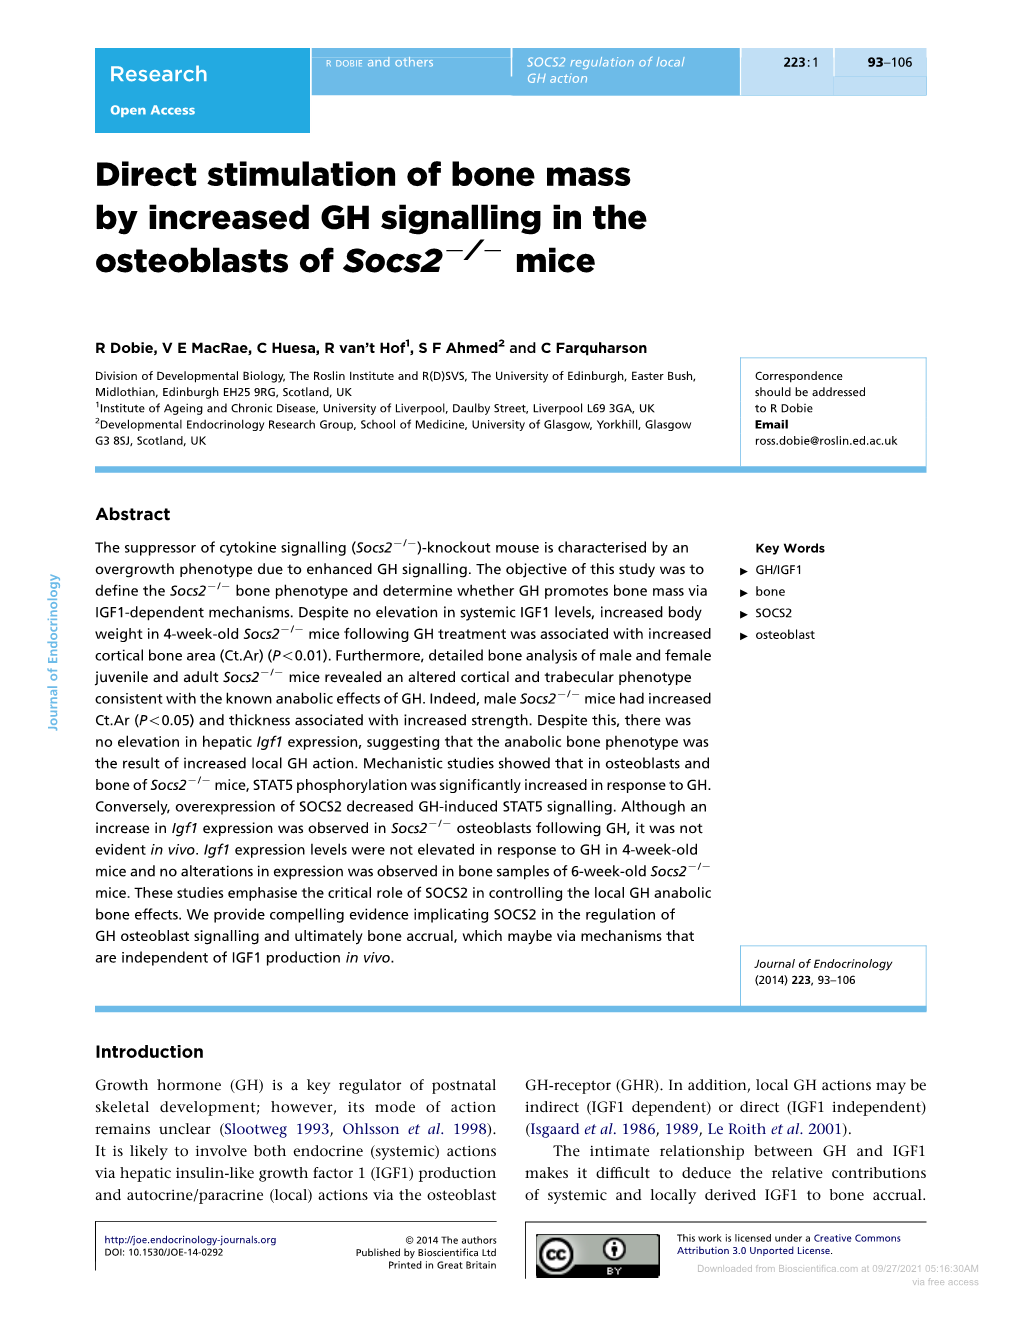 Direct Stimulation of Bone Mass by Increased GH Signalling in the Osteoblasts of Socs2k/K Mice